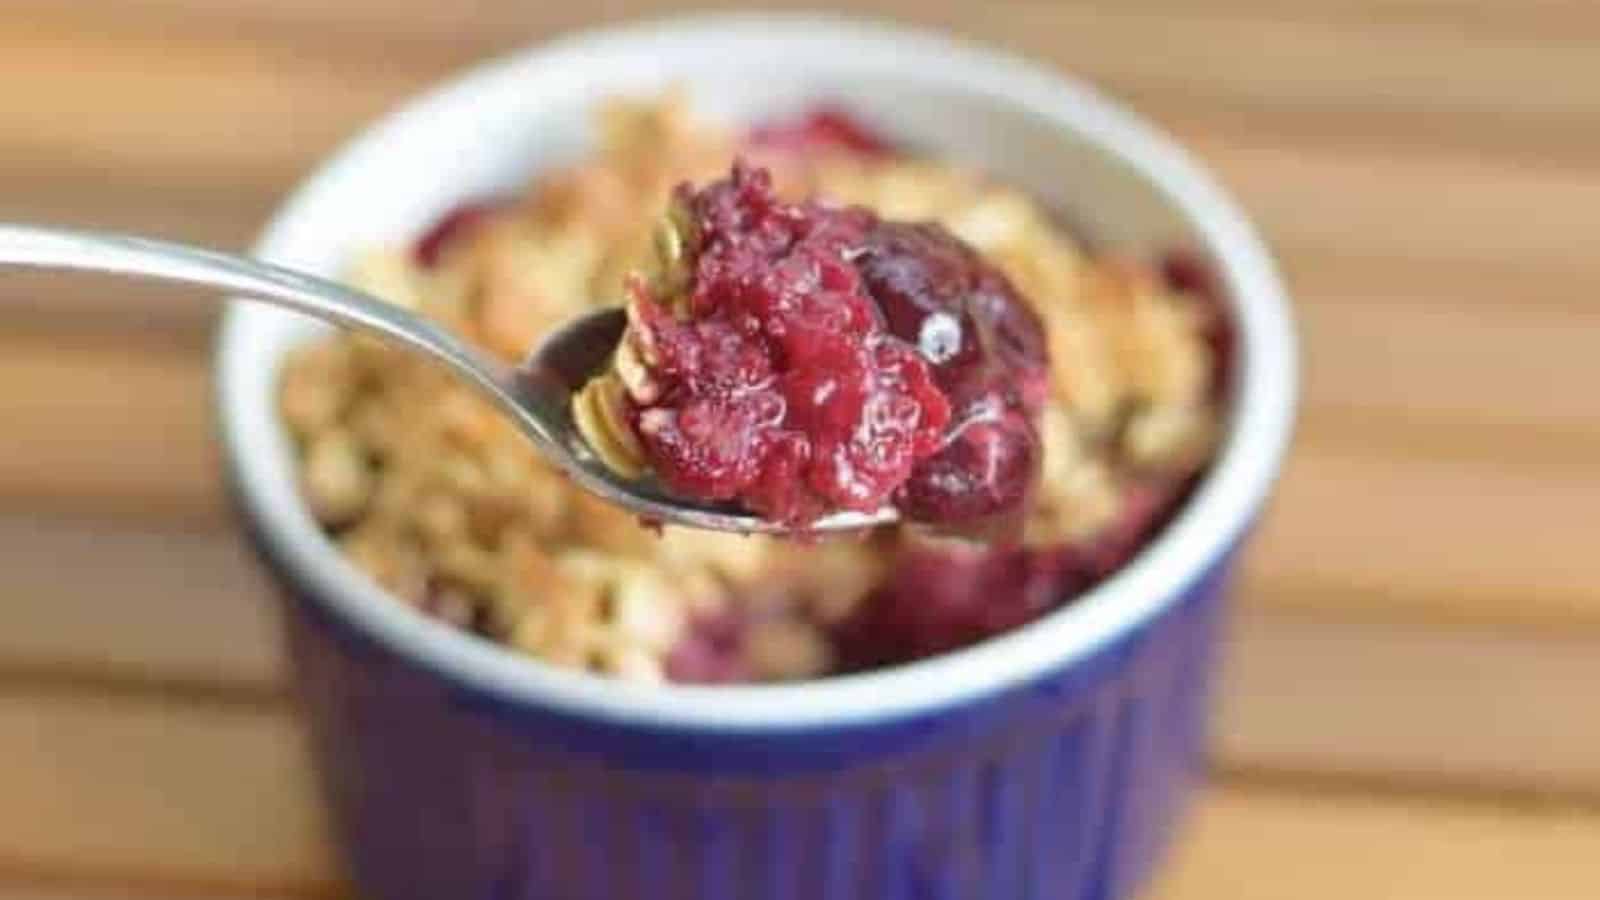 Image shows A spoon lifting berry oatmeal from a ramekin, showcasing the juicy fruit topping and golden-brown crust beneath.